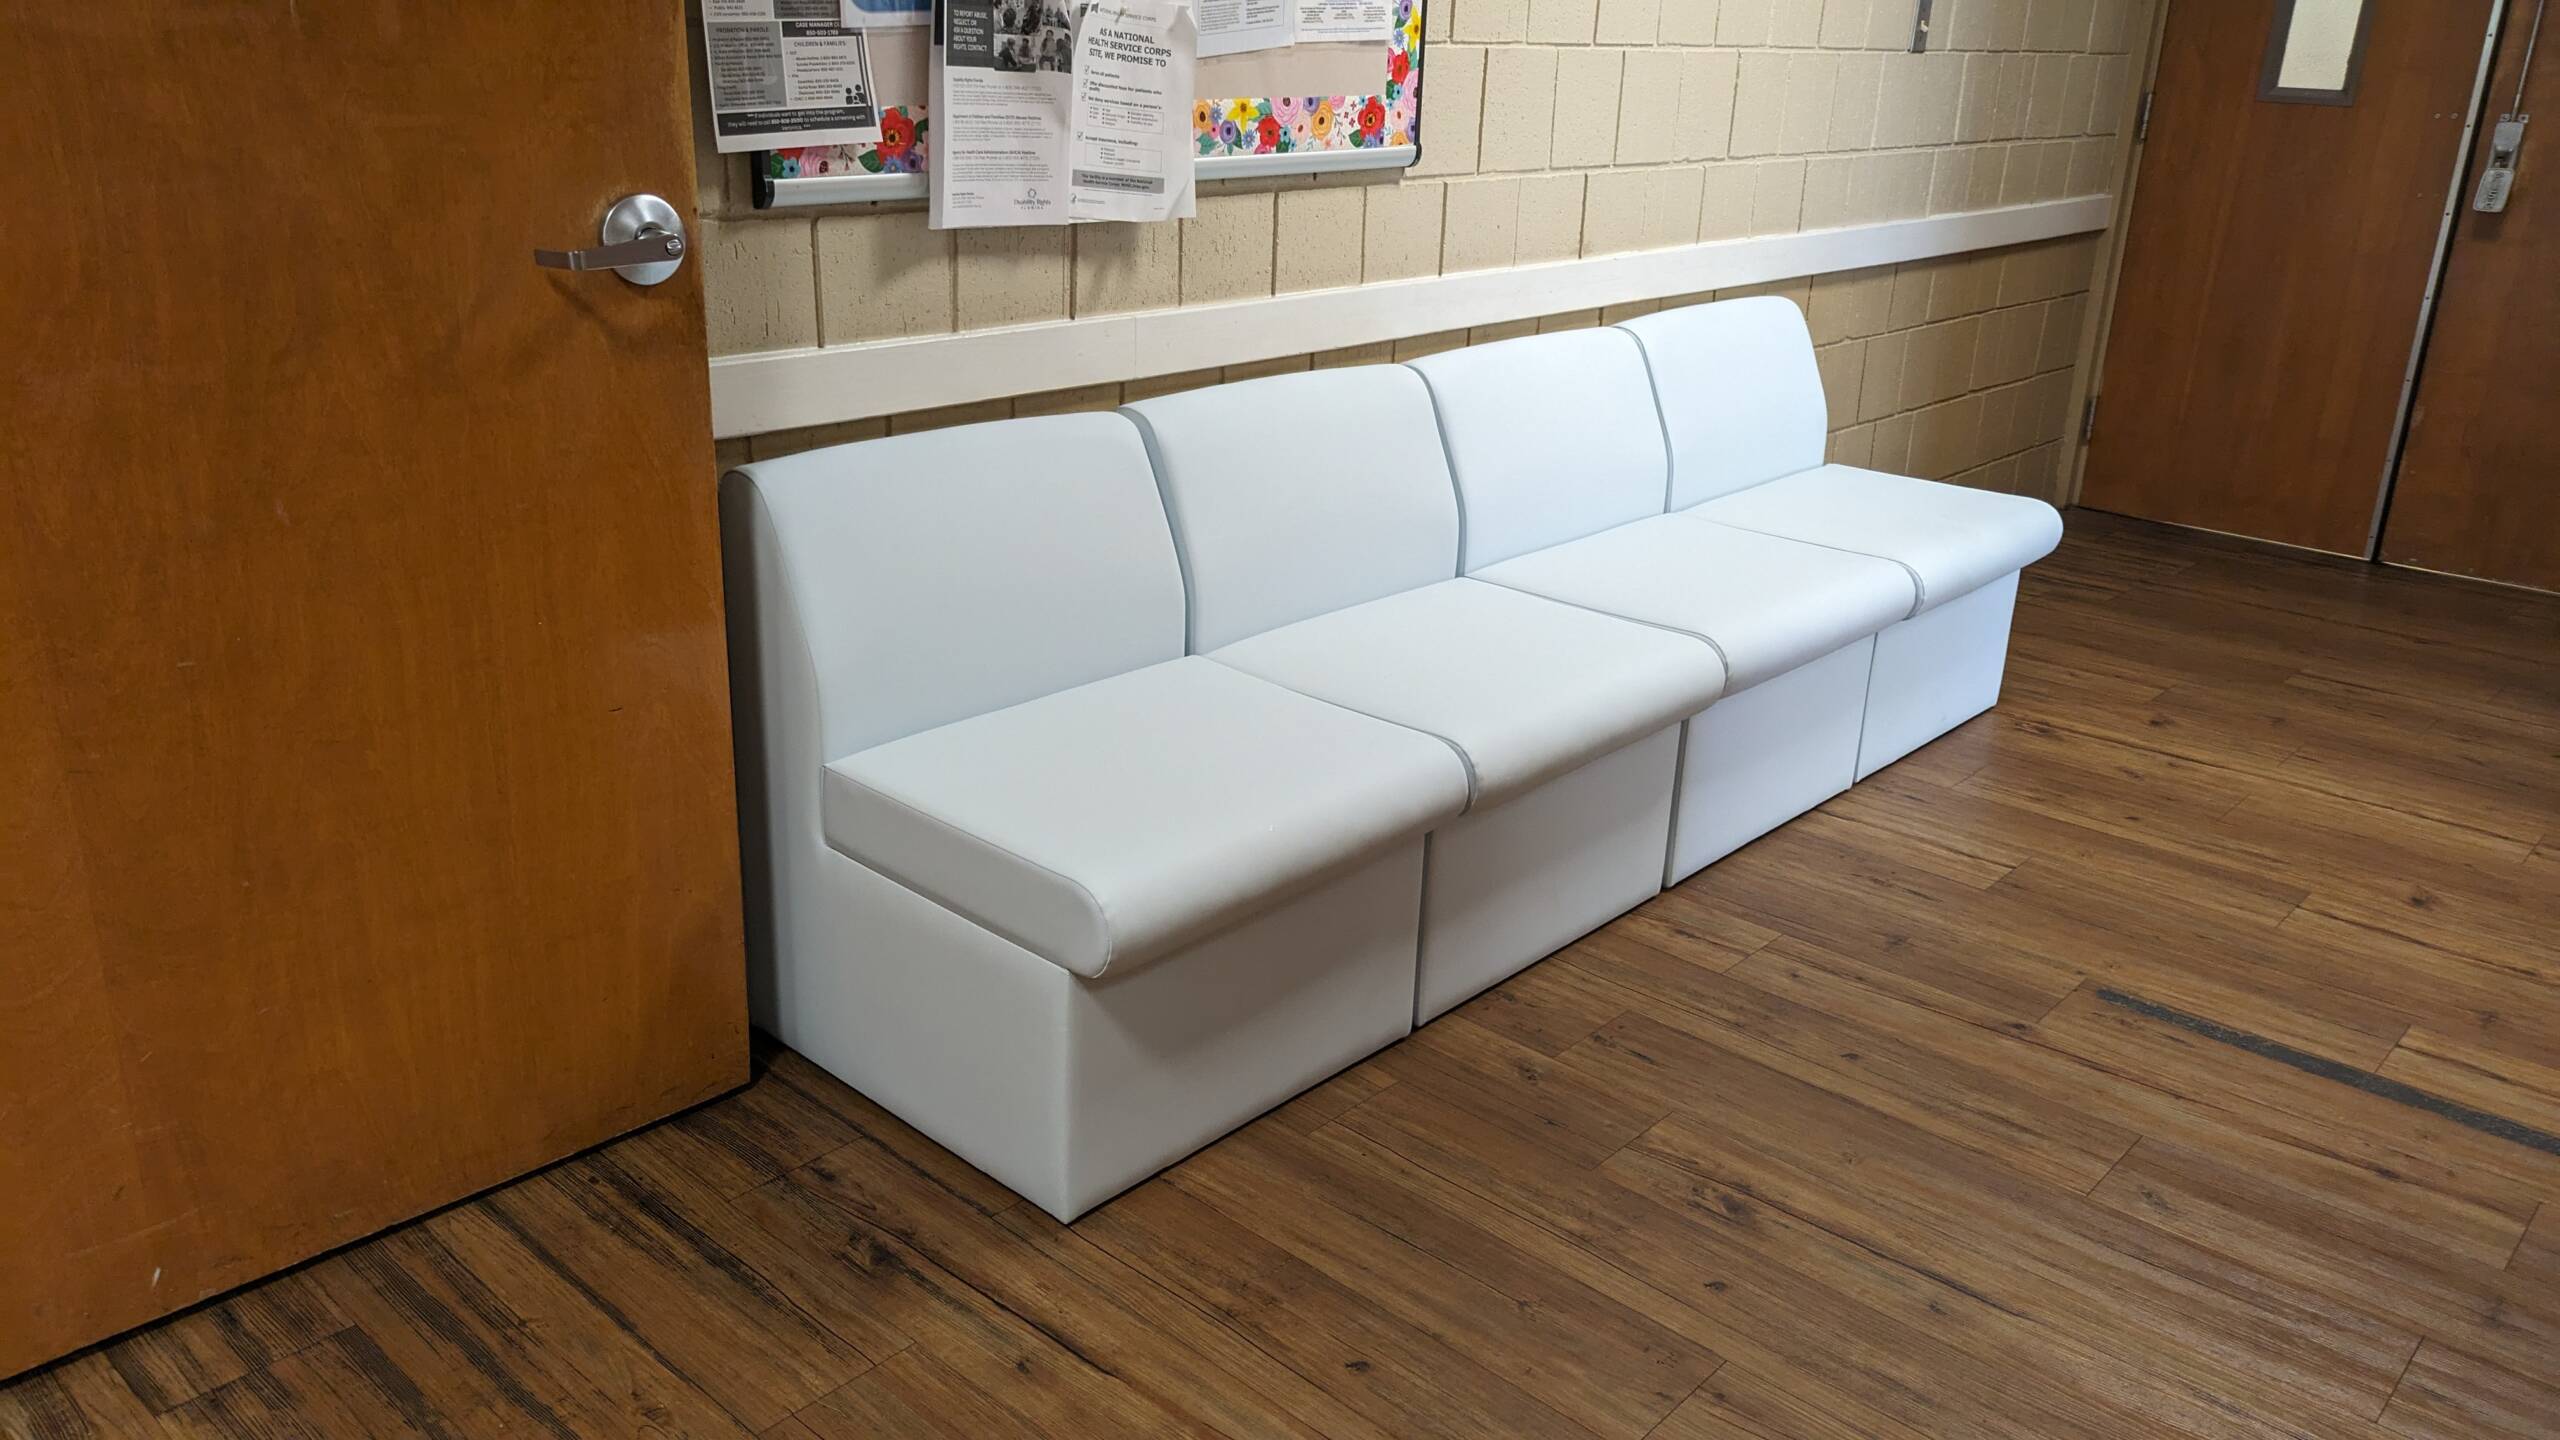 Road to Recovery women's and men's unit couches purchased with grant funds